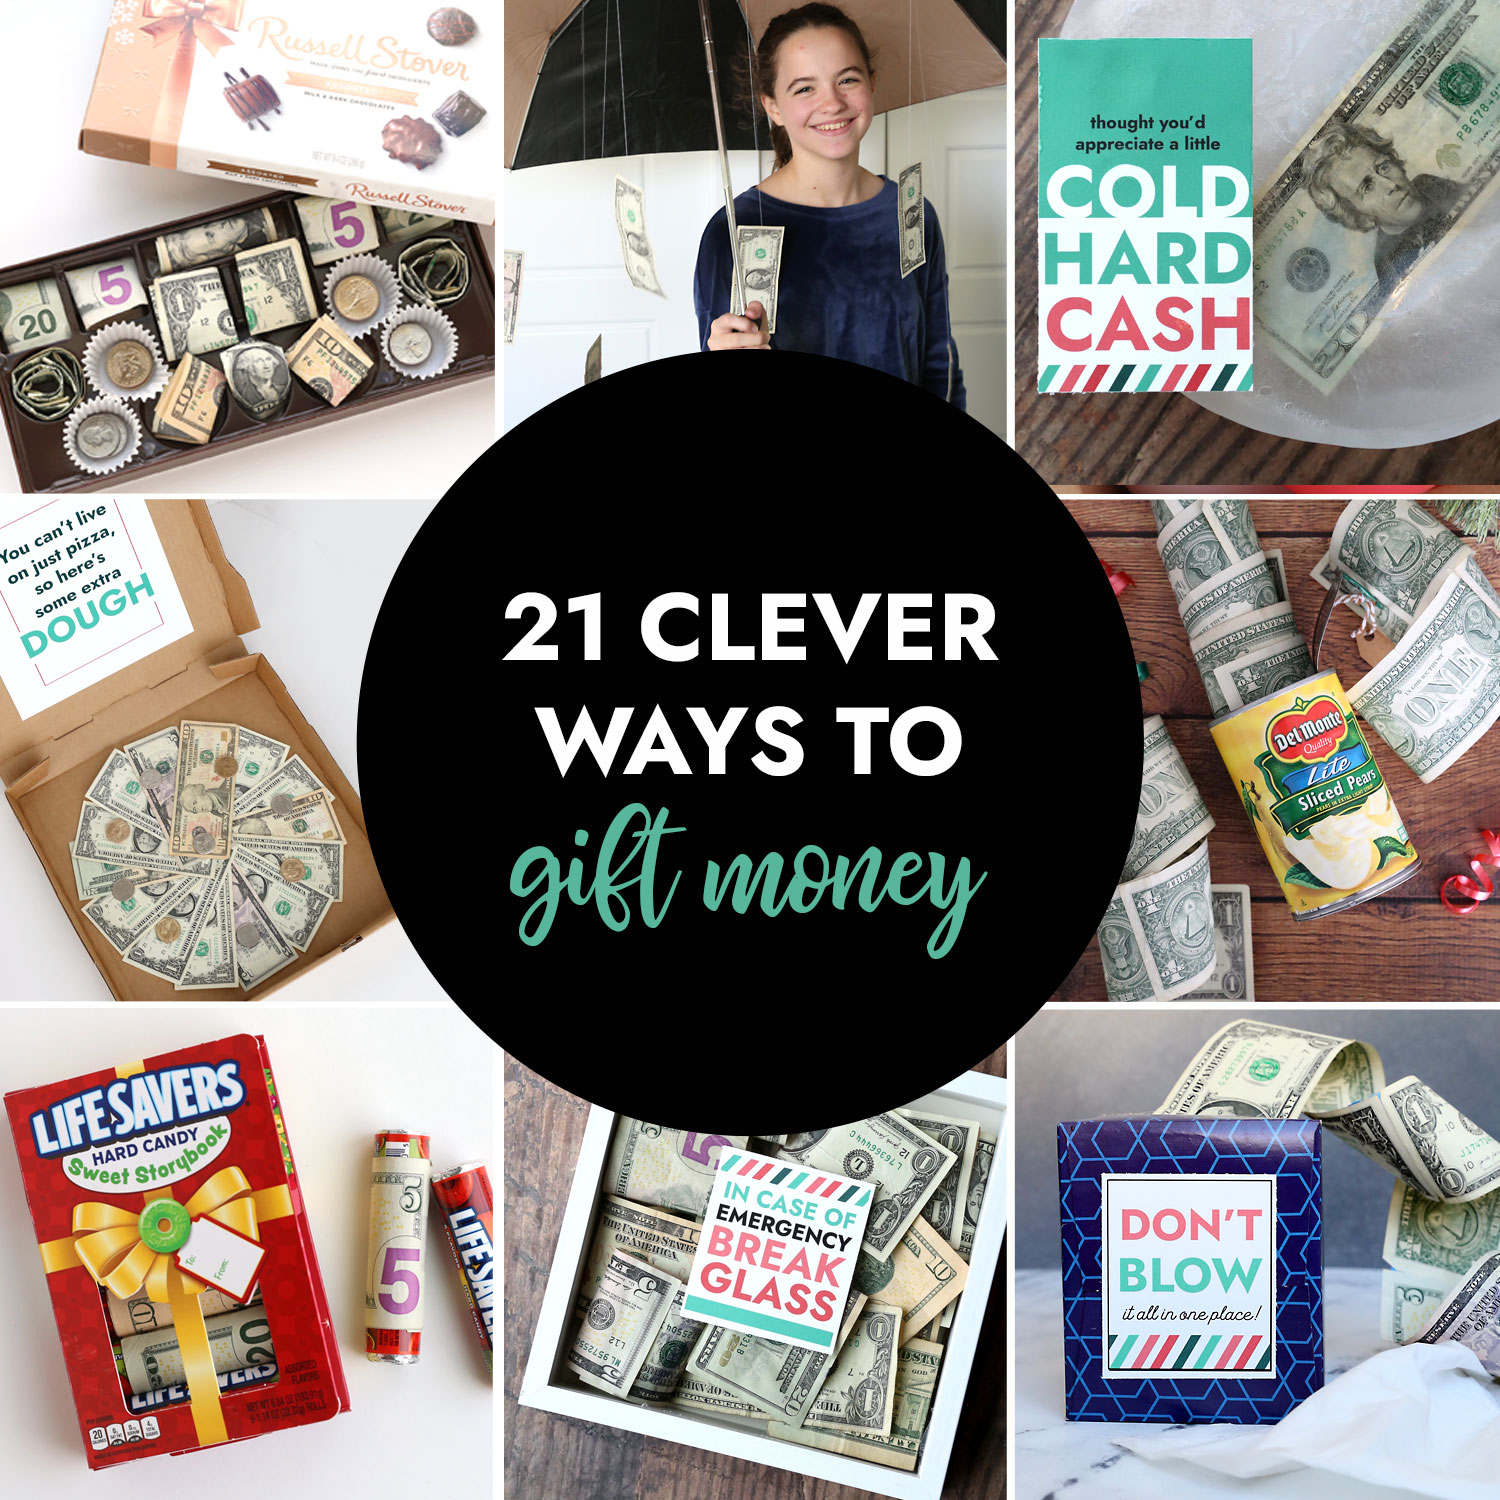 20 Ways to Make Your Own Gift Card Holders